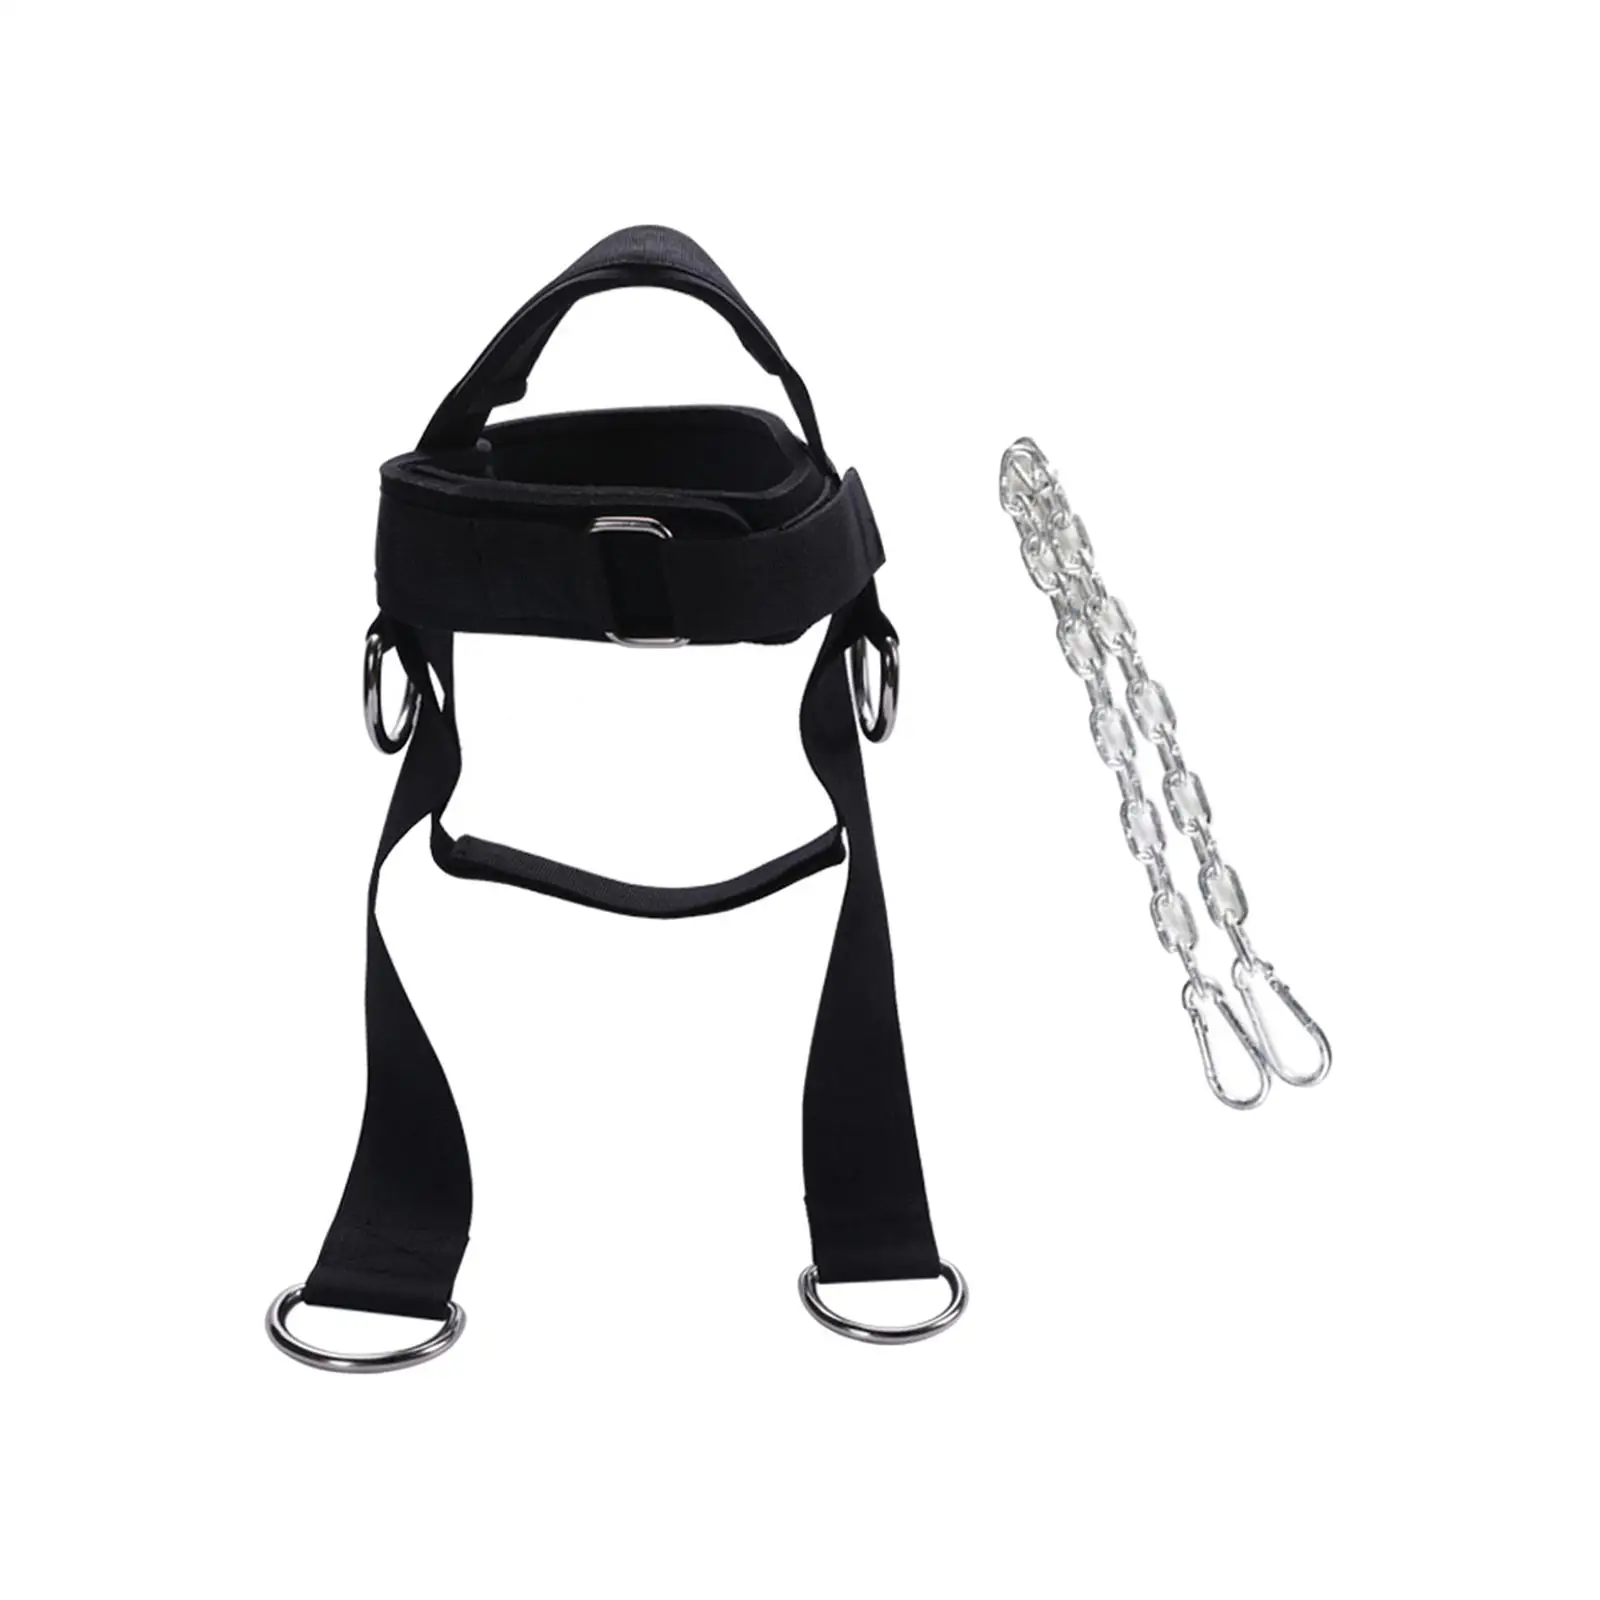 Head Harness Support with Iron Chain and Metal Loop Head Neck Training for